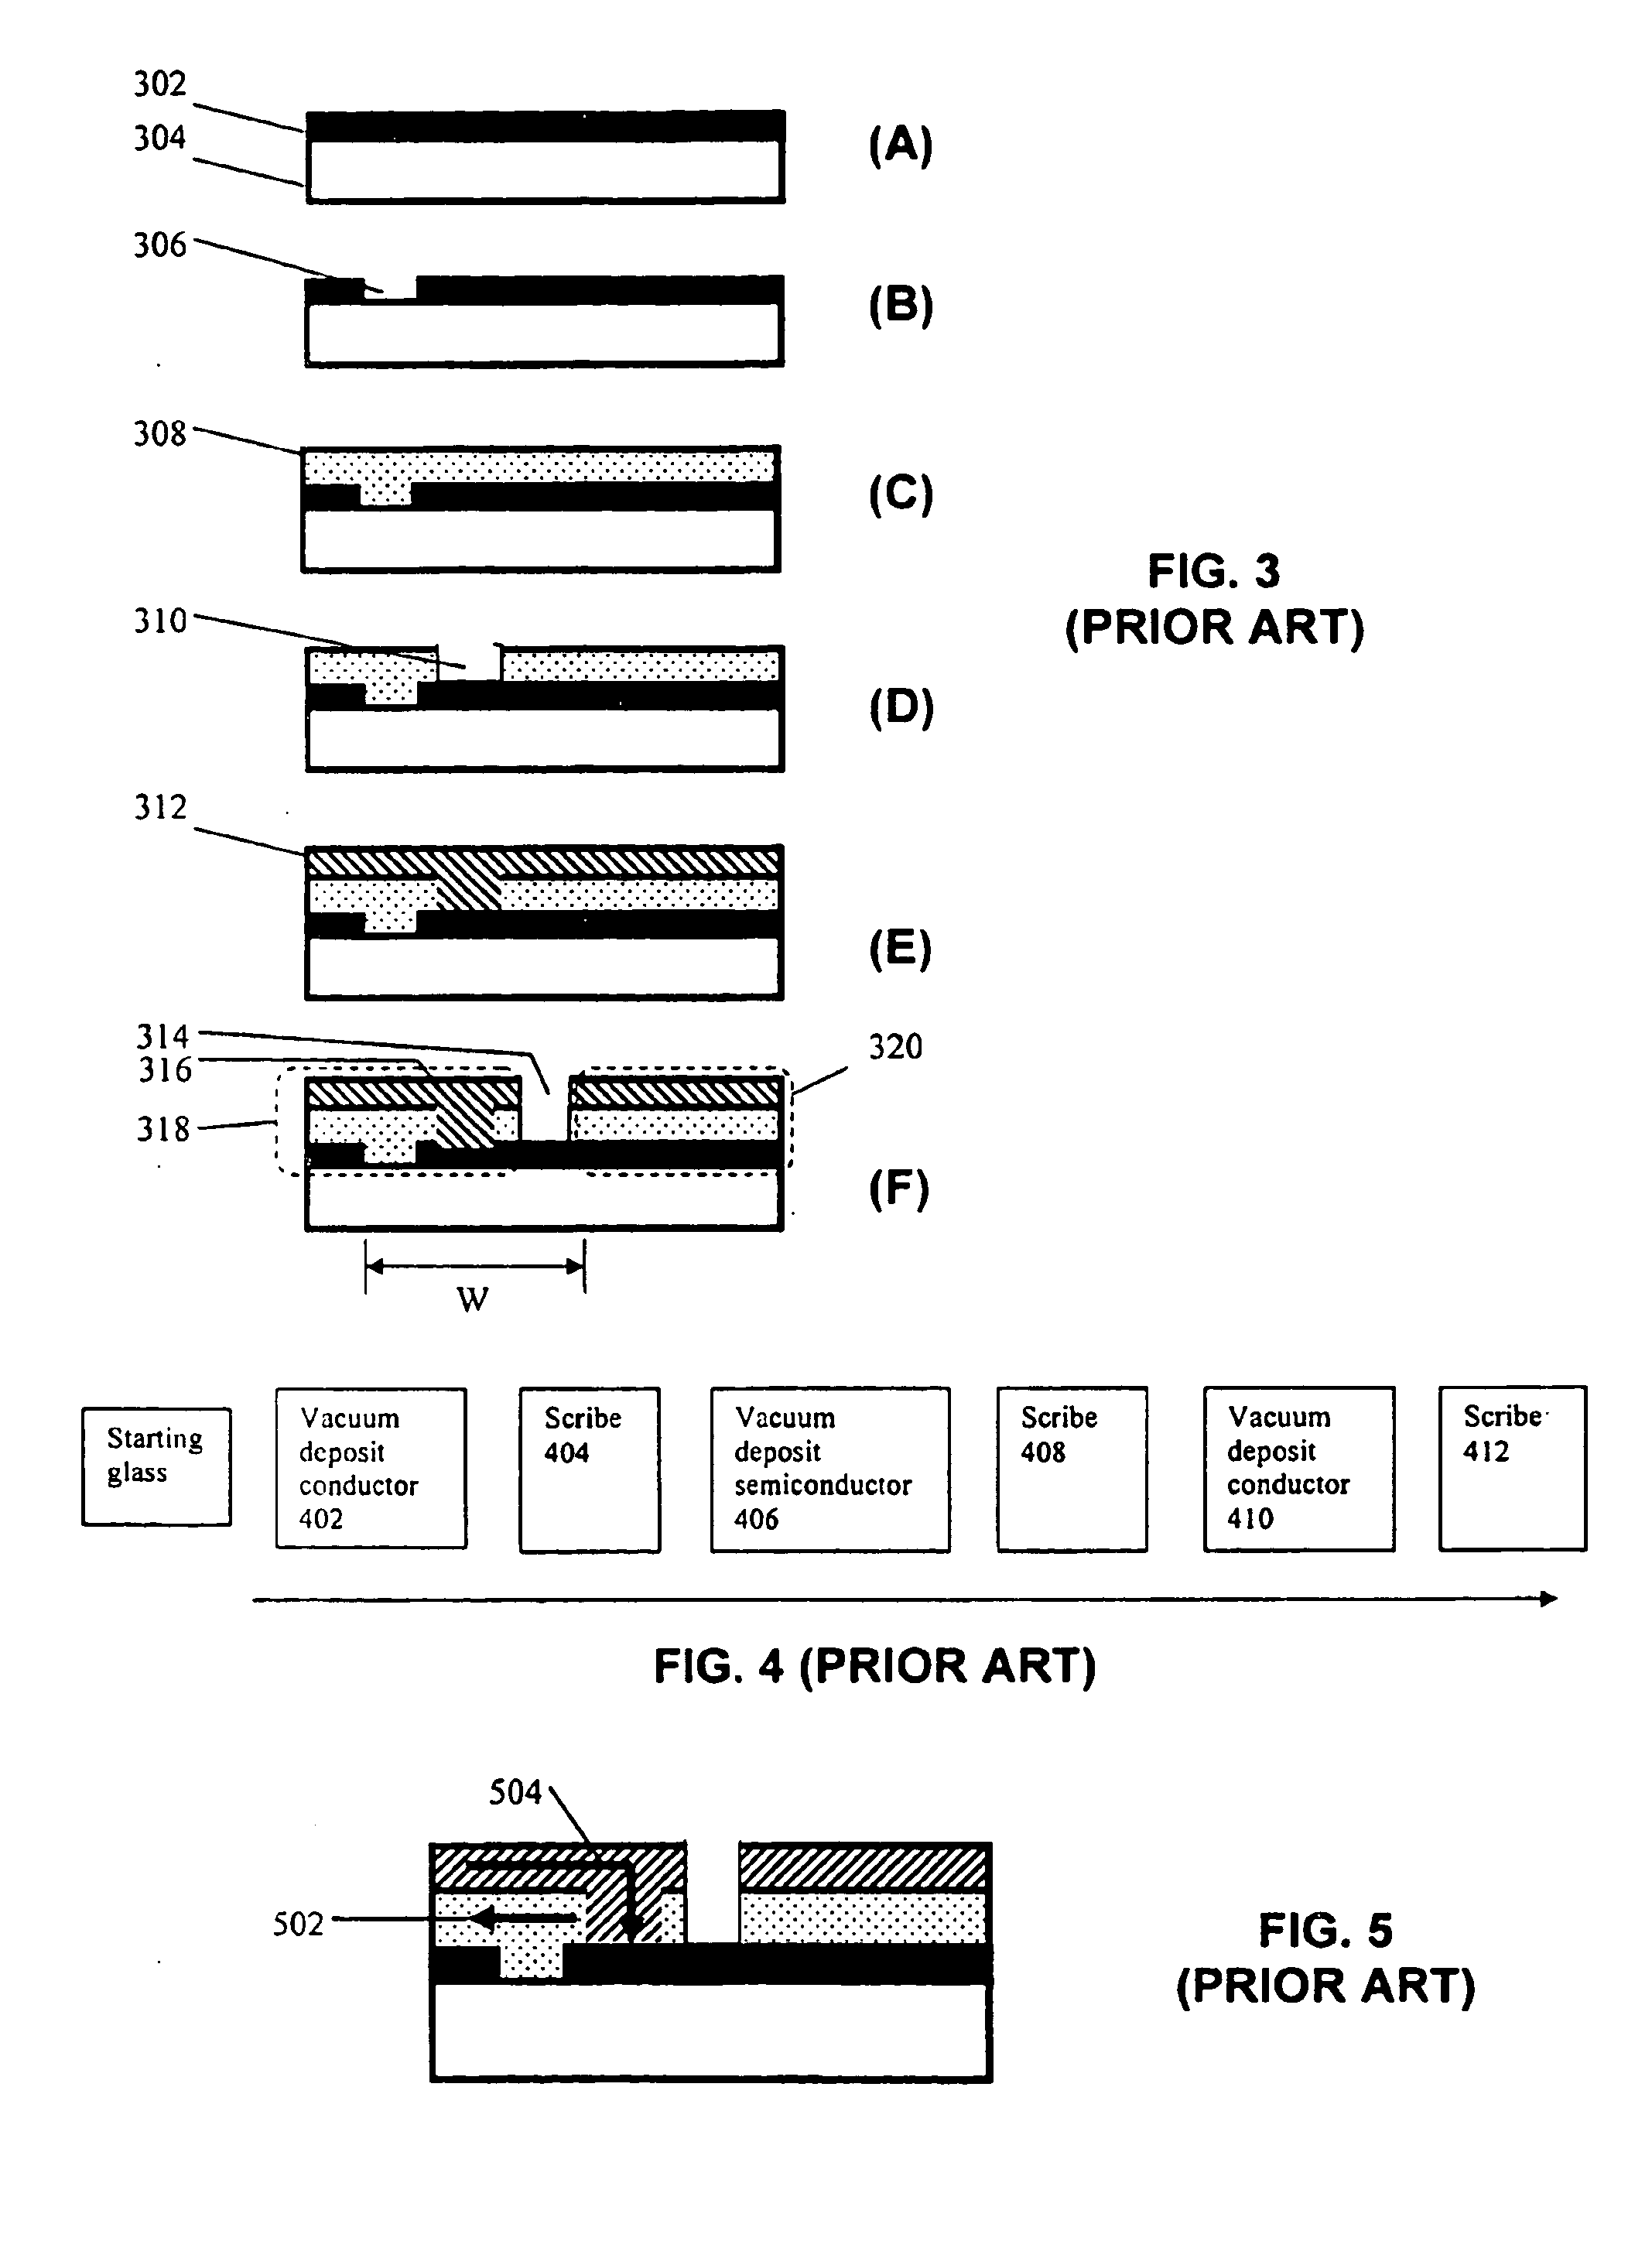 System and method for making an improved thin film solar cell interconnect